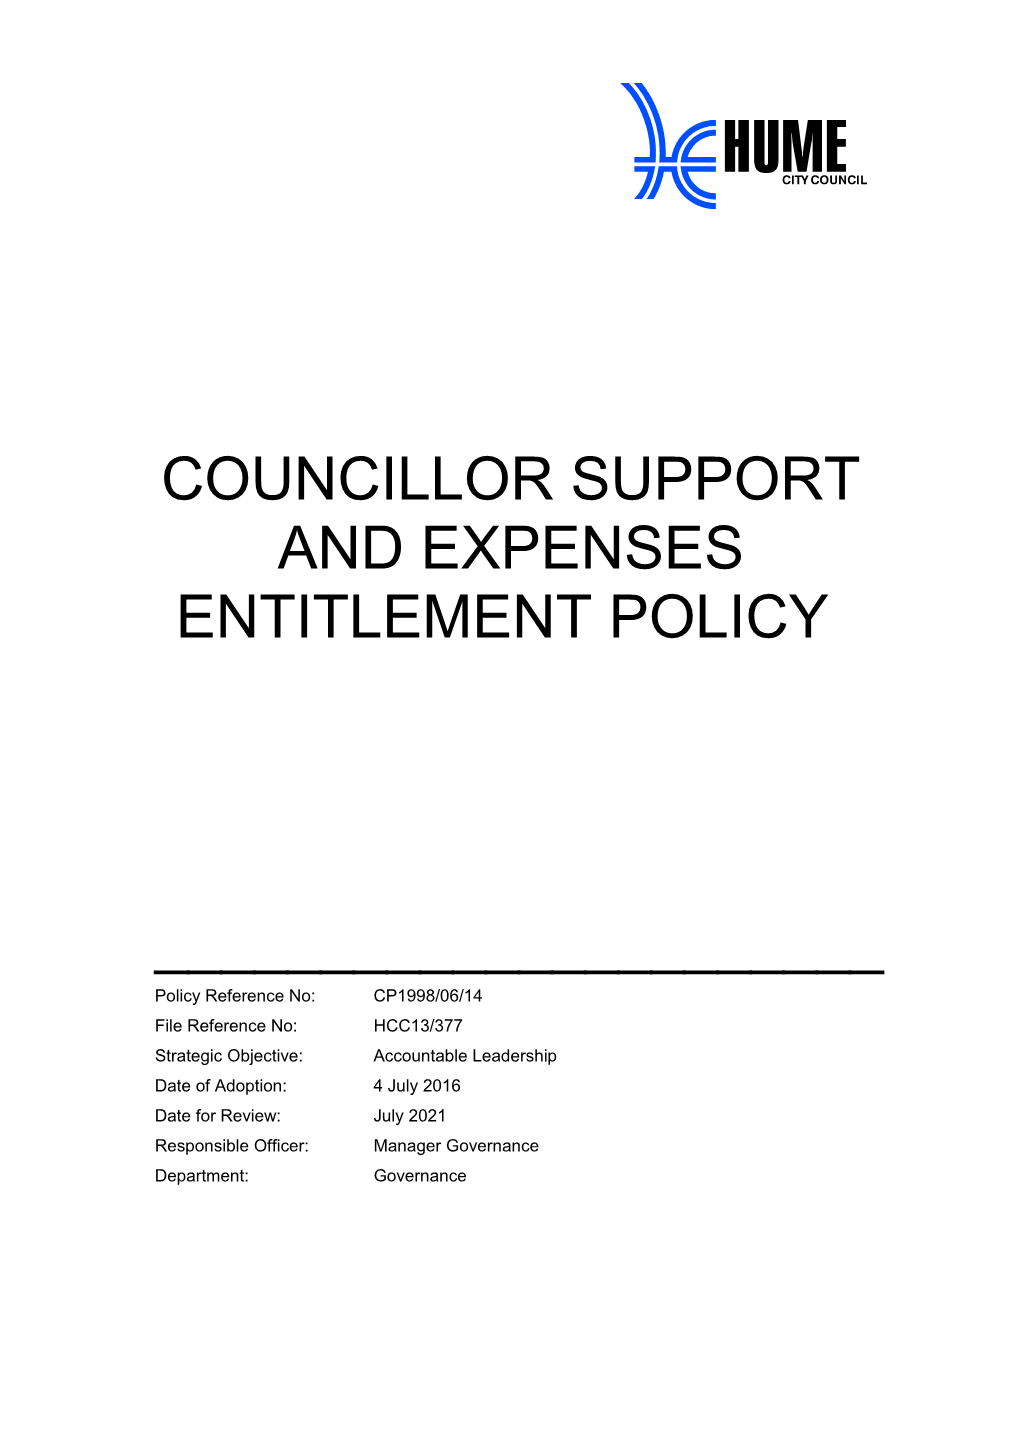 Councillor Support and Expenses Entitlement Policy